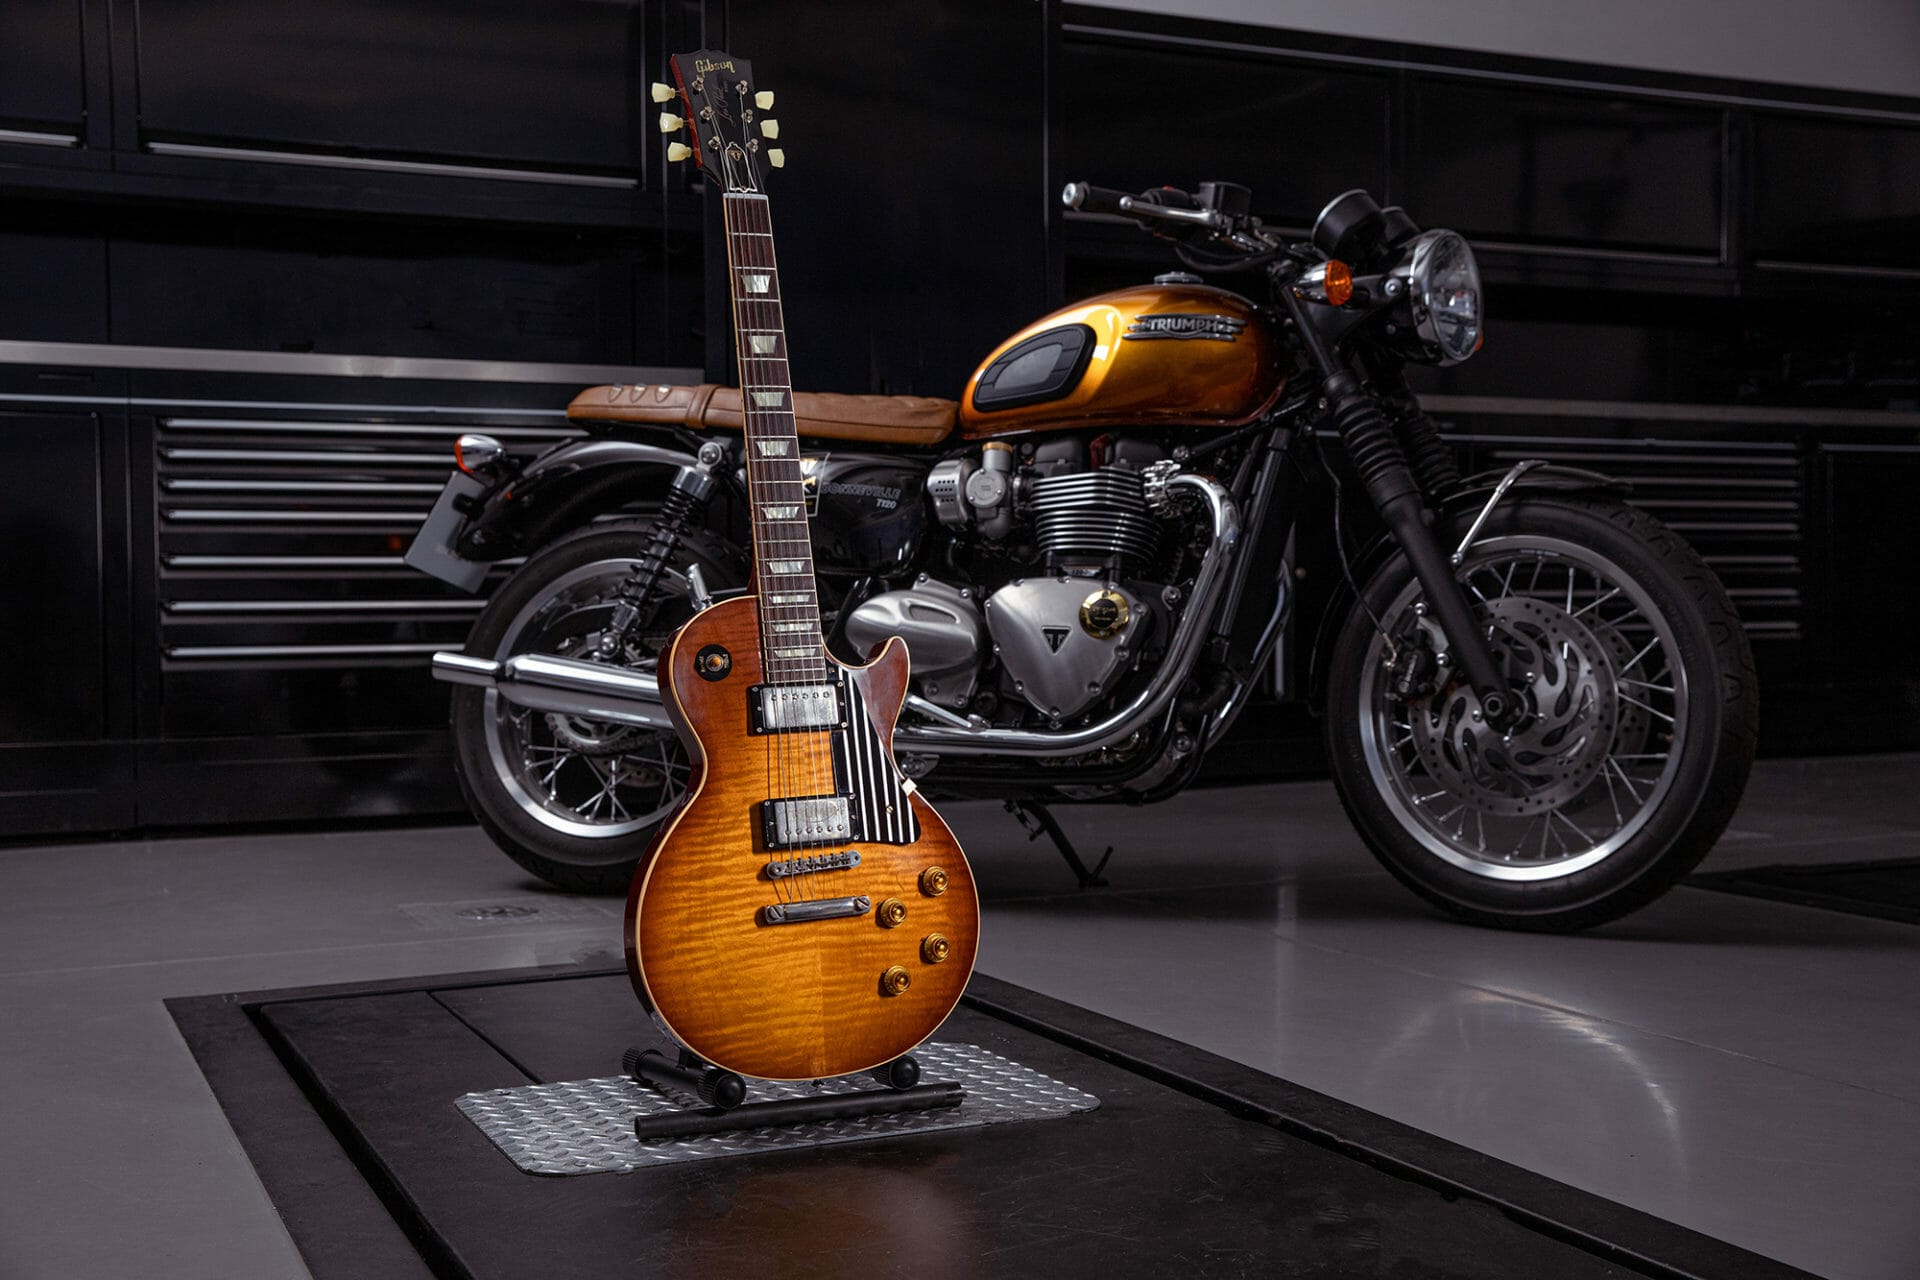 TRIUMPH & Gibson - Creations for the Gentlemans Ride
- also in the MOTORCYCLES.NEWS APP